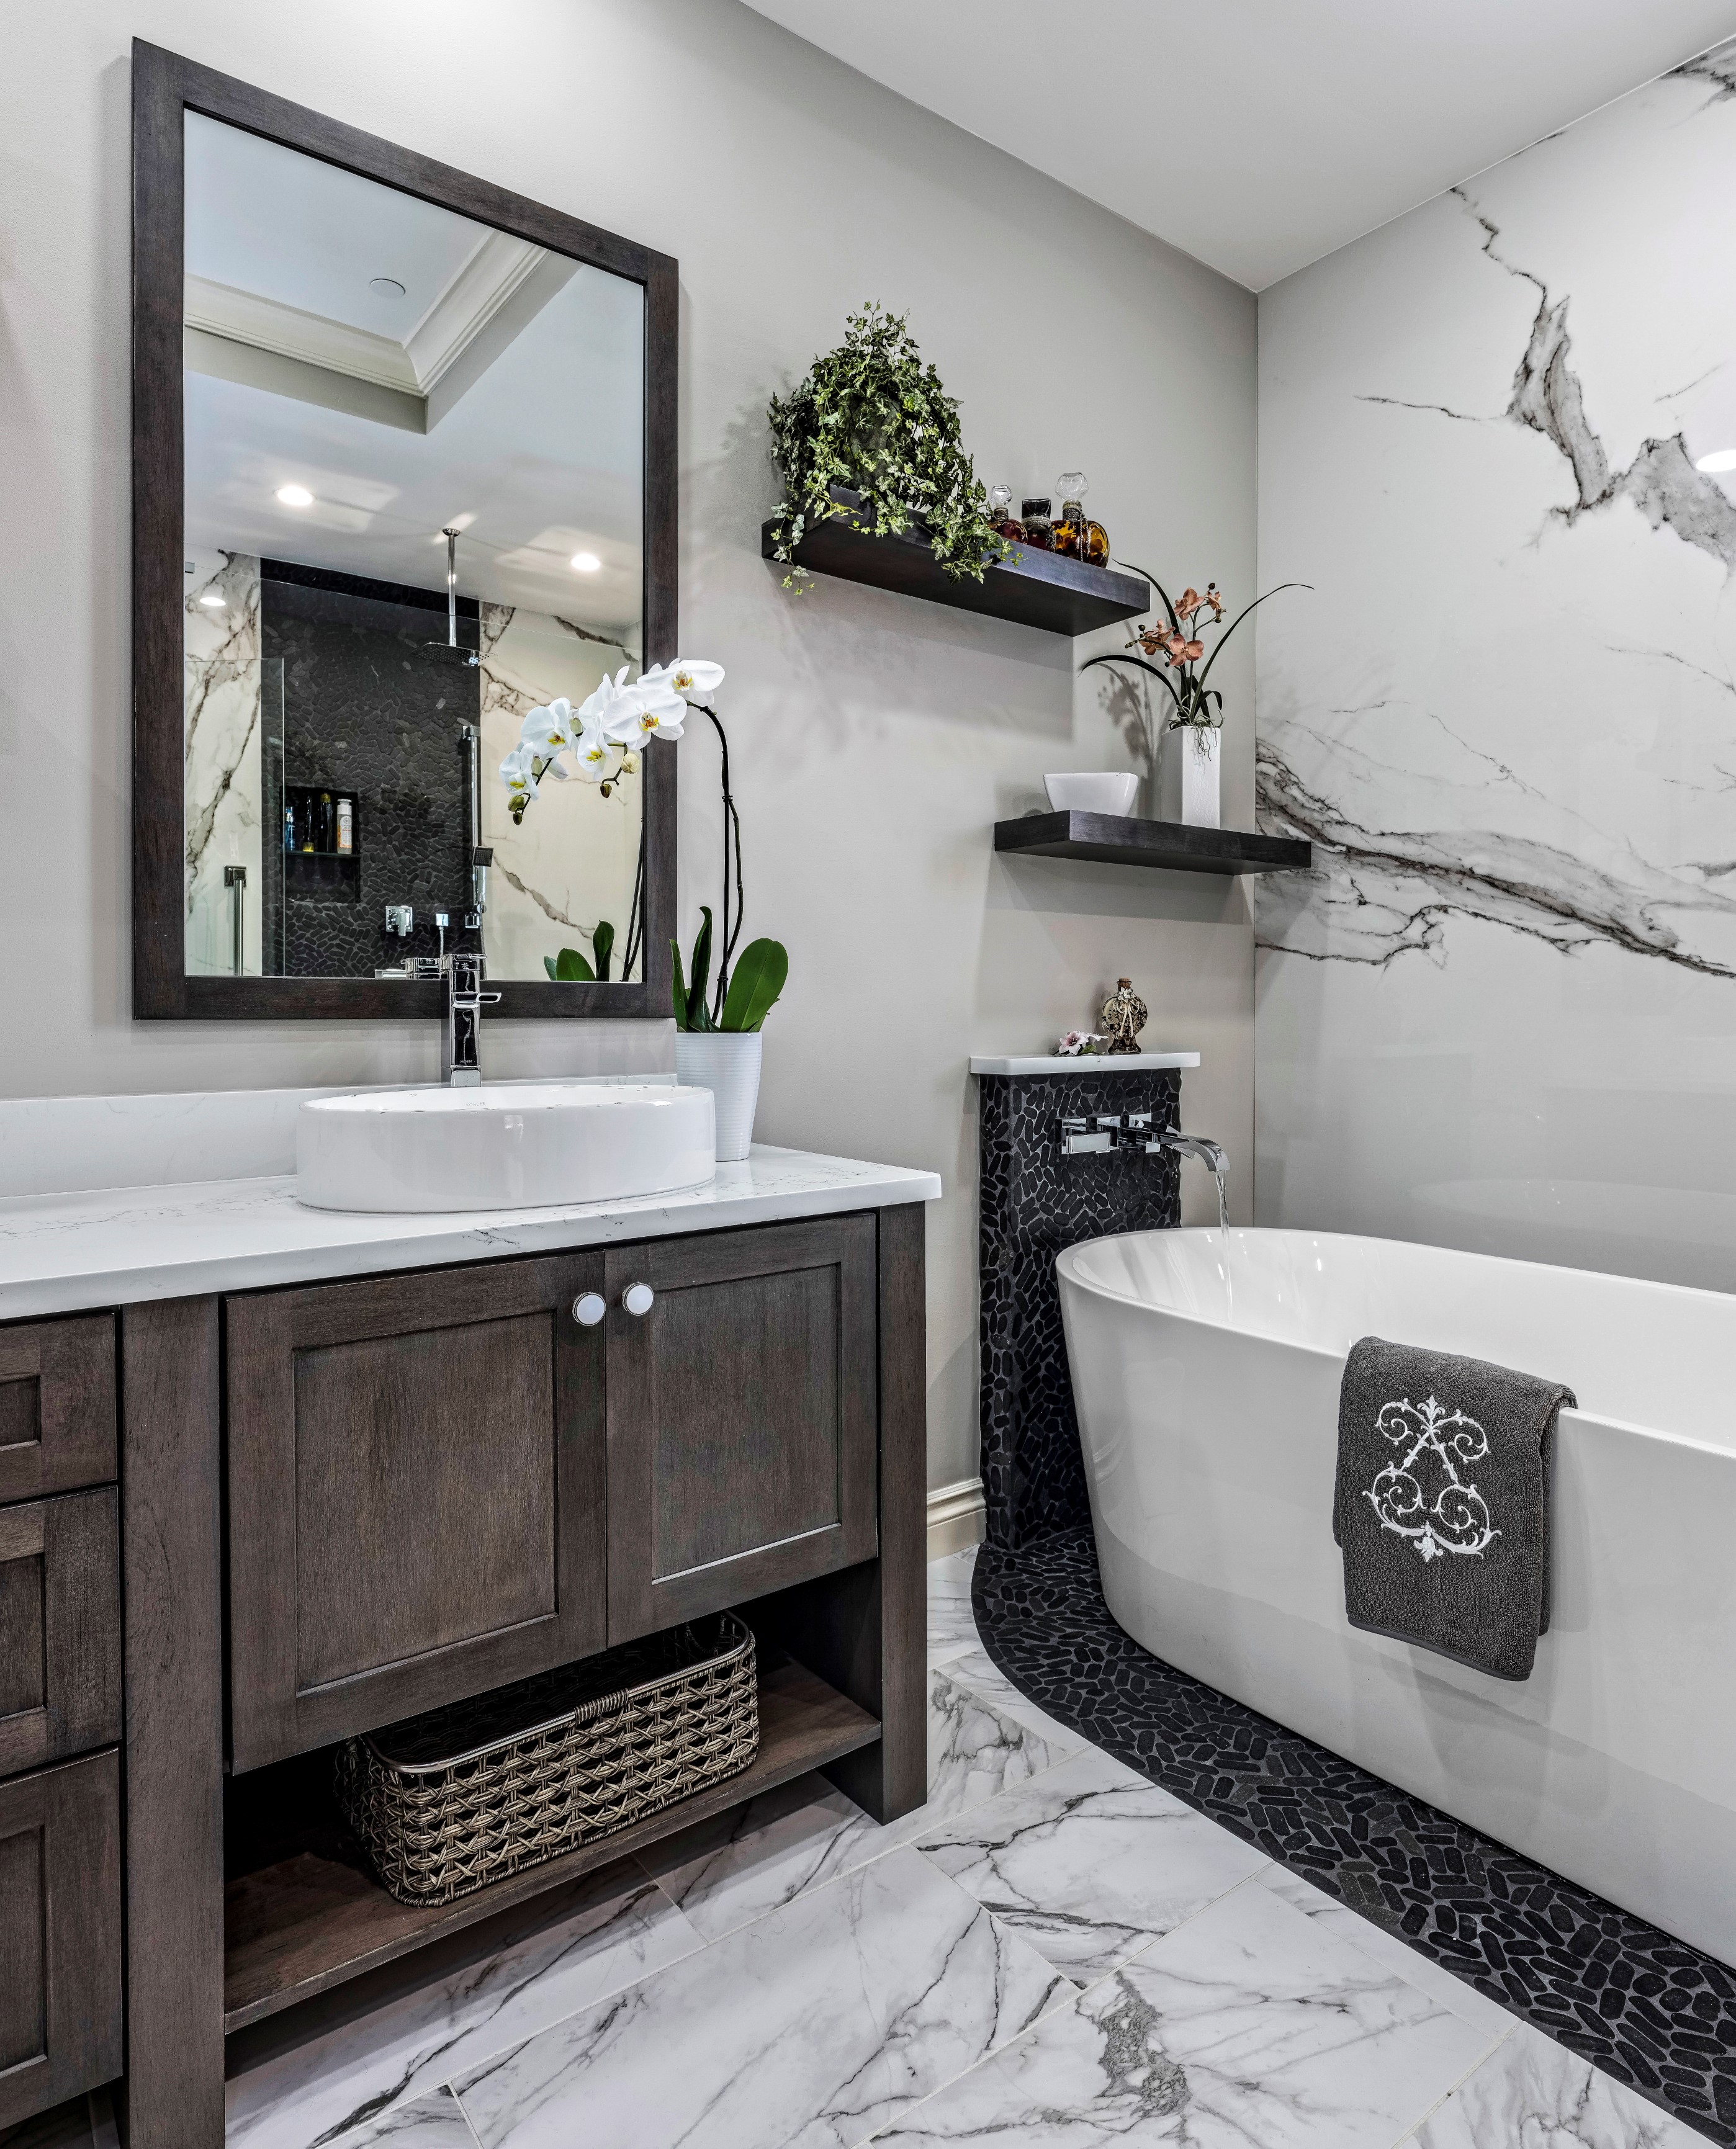 How Much Does Bathroom Remodeling Typically Cost? | Central Texas ...